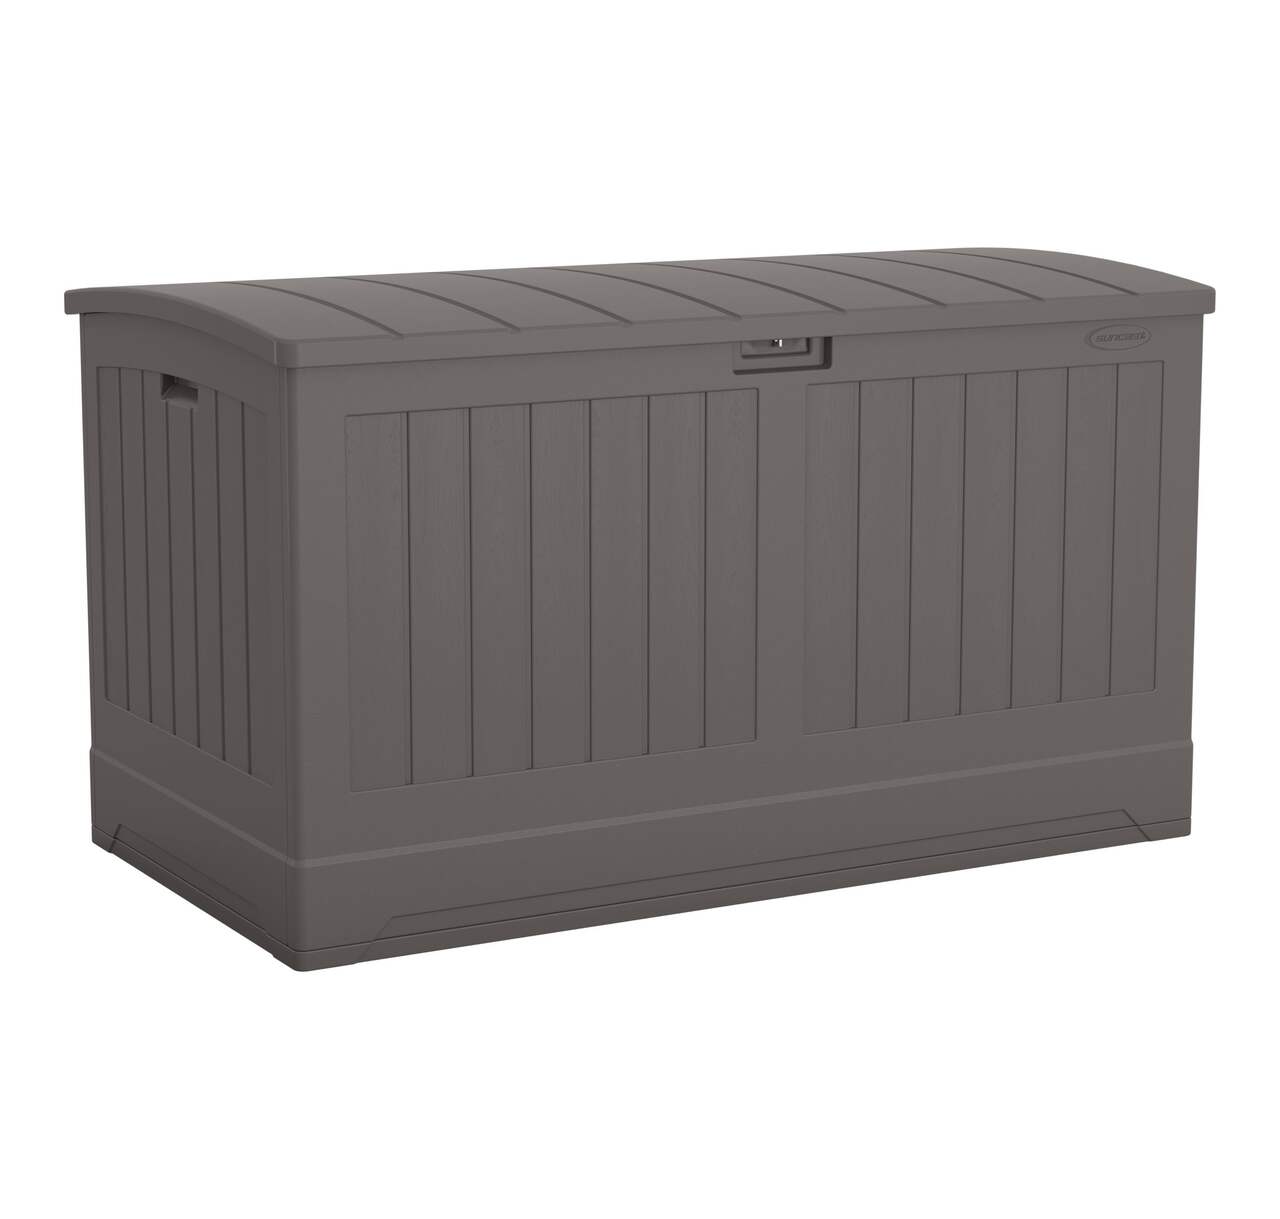 Suncast Resin Outdoor Storage Deck Box, Extra Large, Grey, 200-Gal